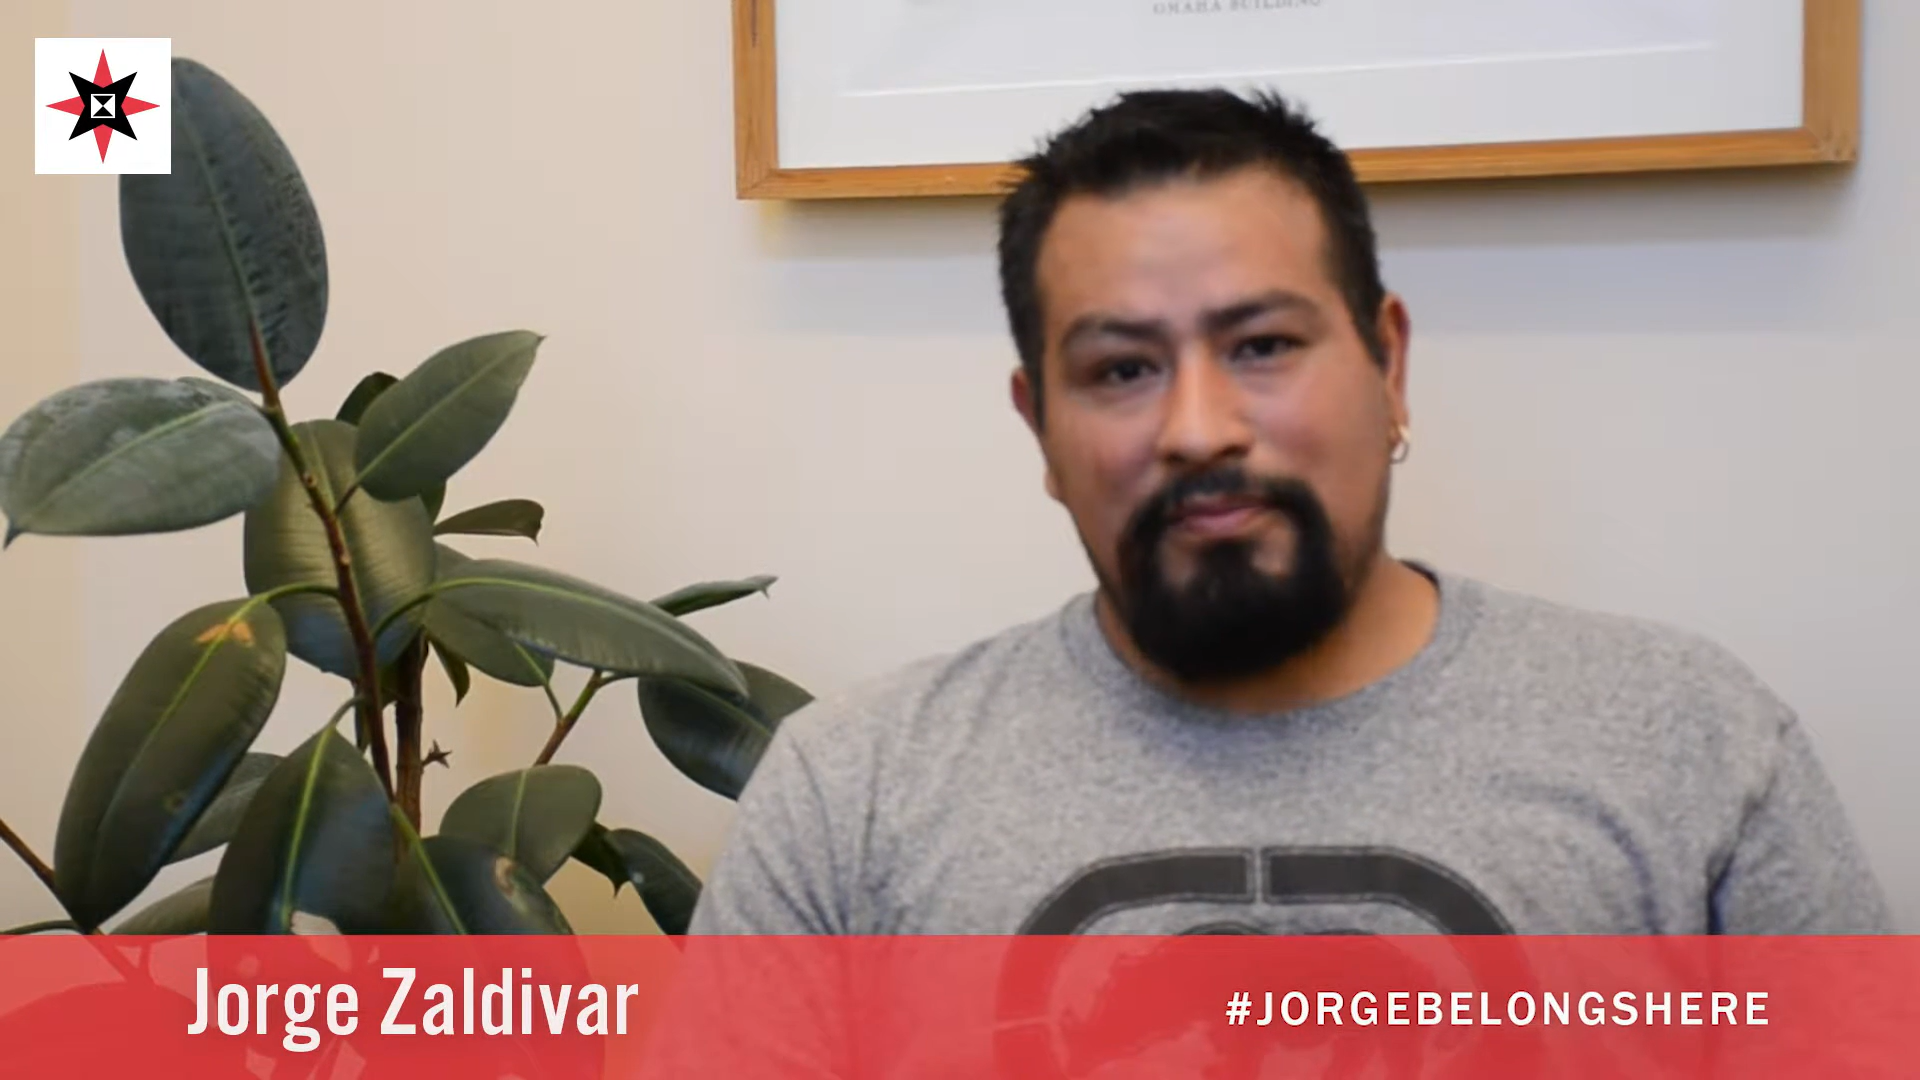 Jorge on why he came to the U.S., and why he needs to stay